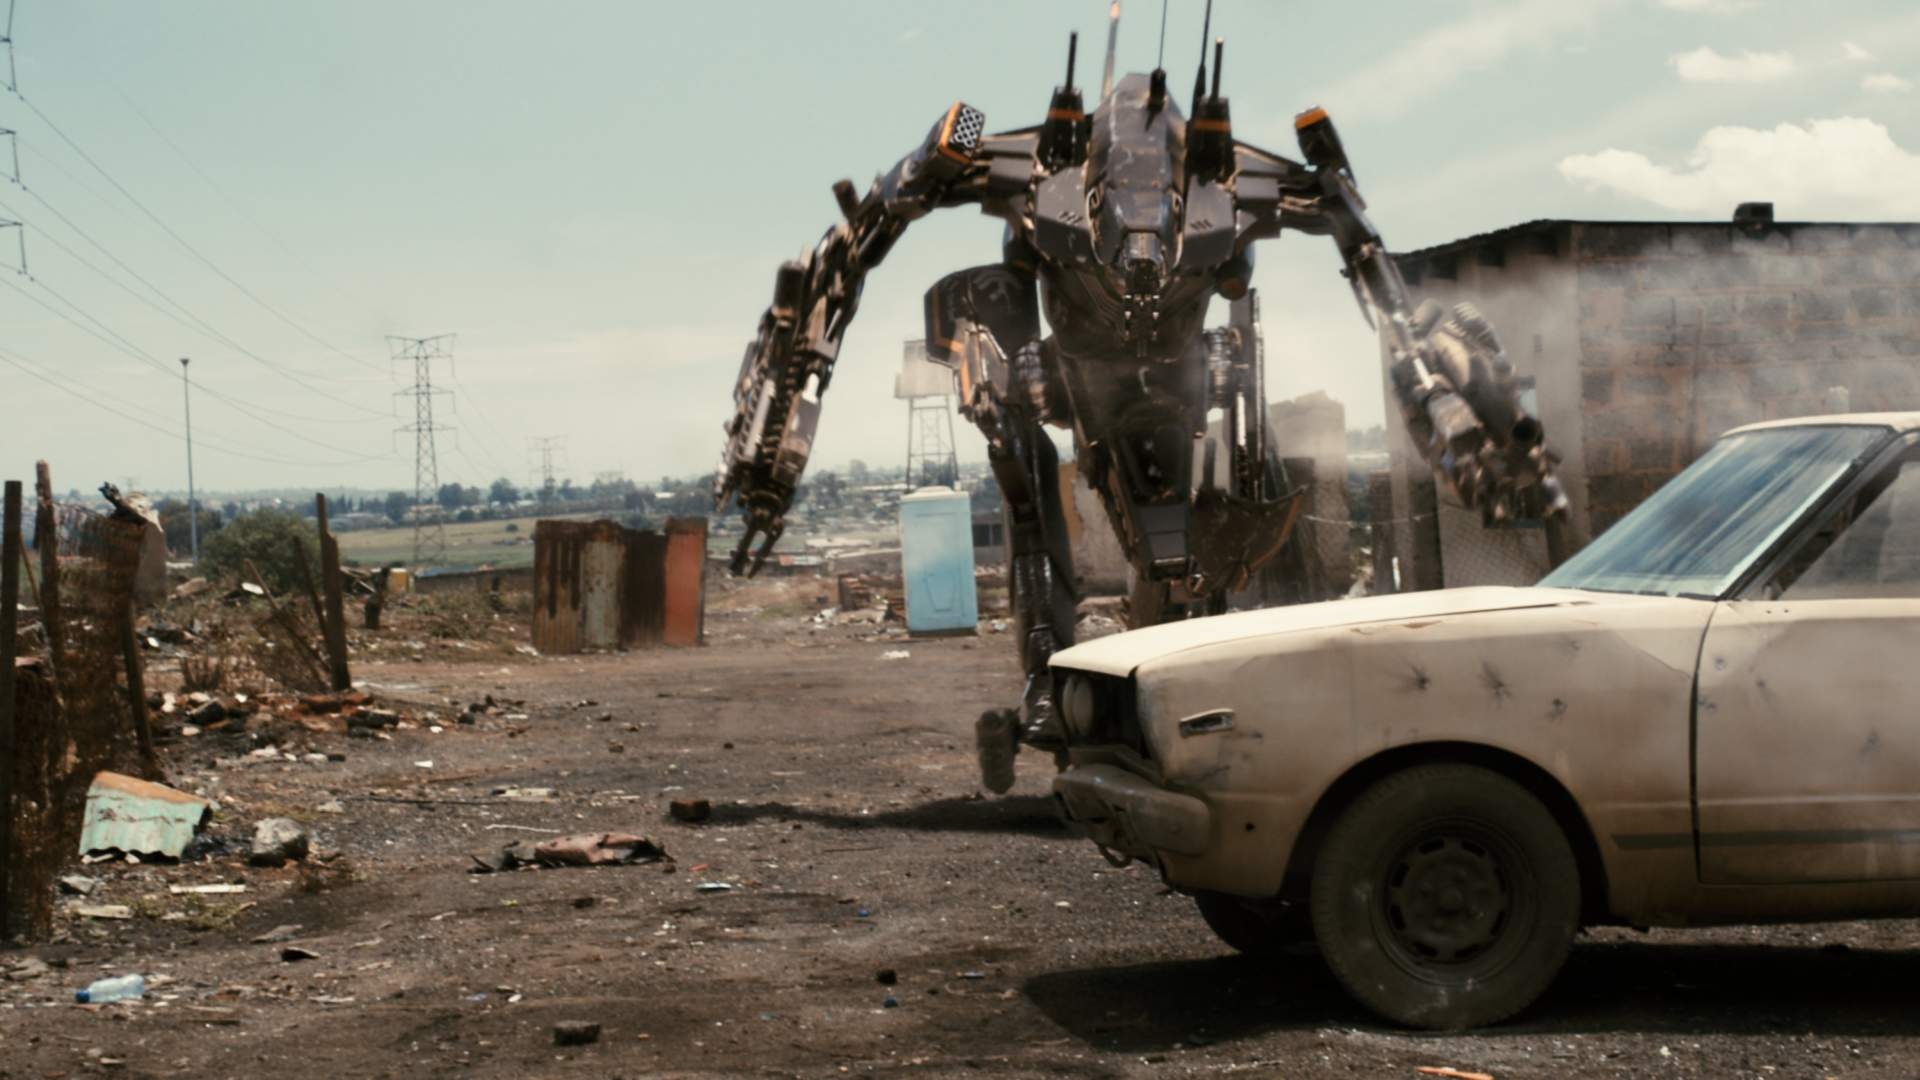 District 9: An original and innovative science fiction movie made by director Neill Blomkamp. 1920x1080 Full HD Background.